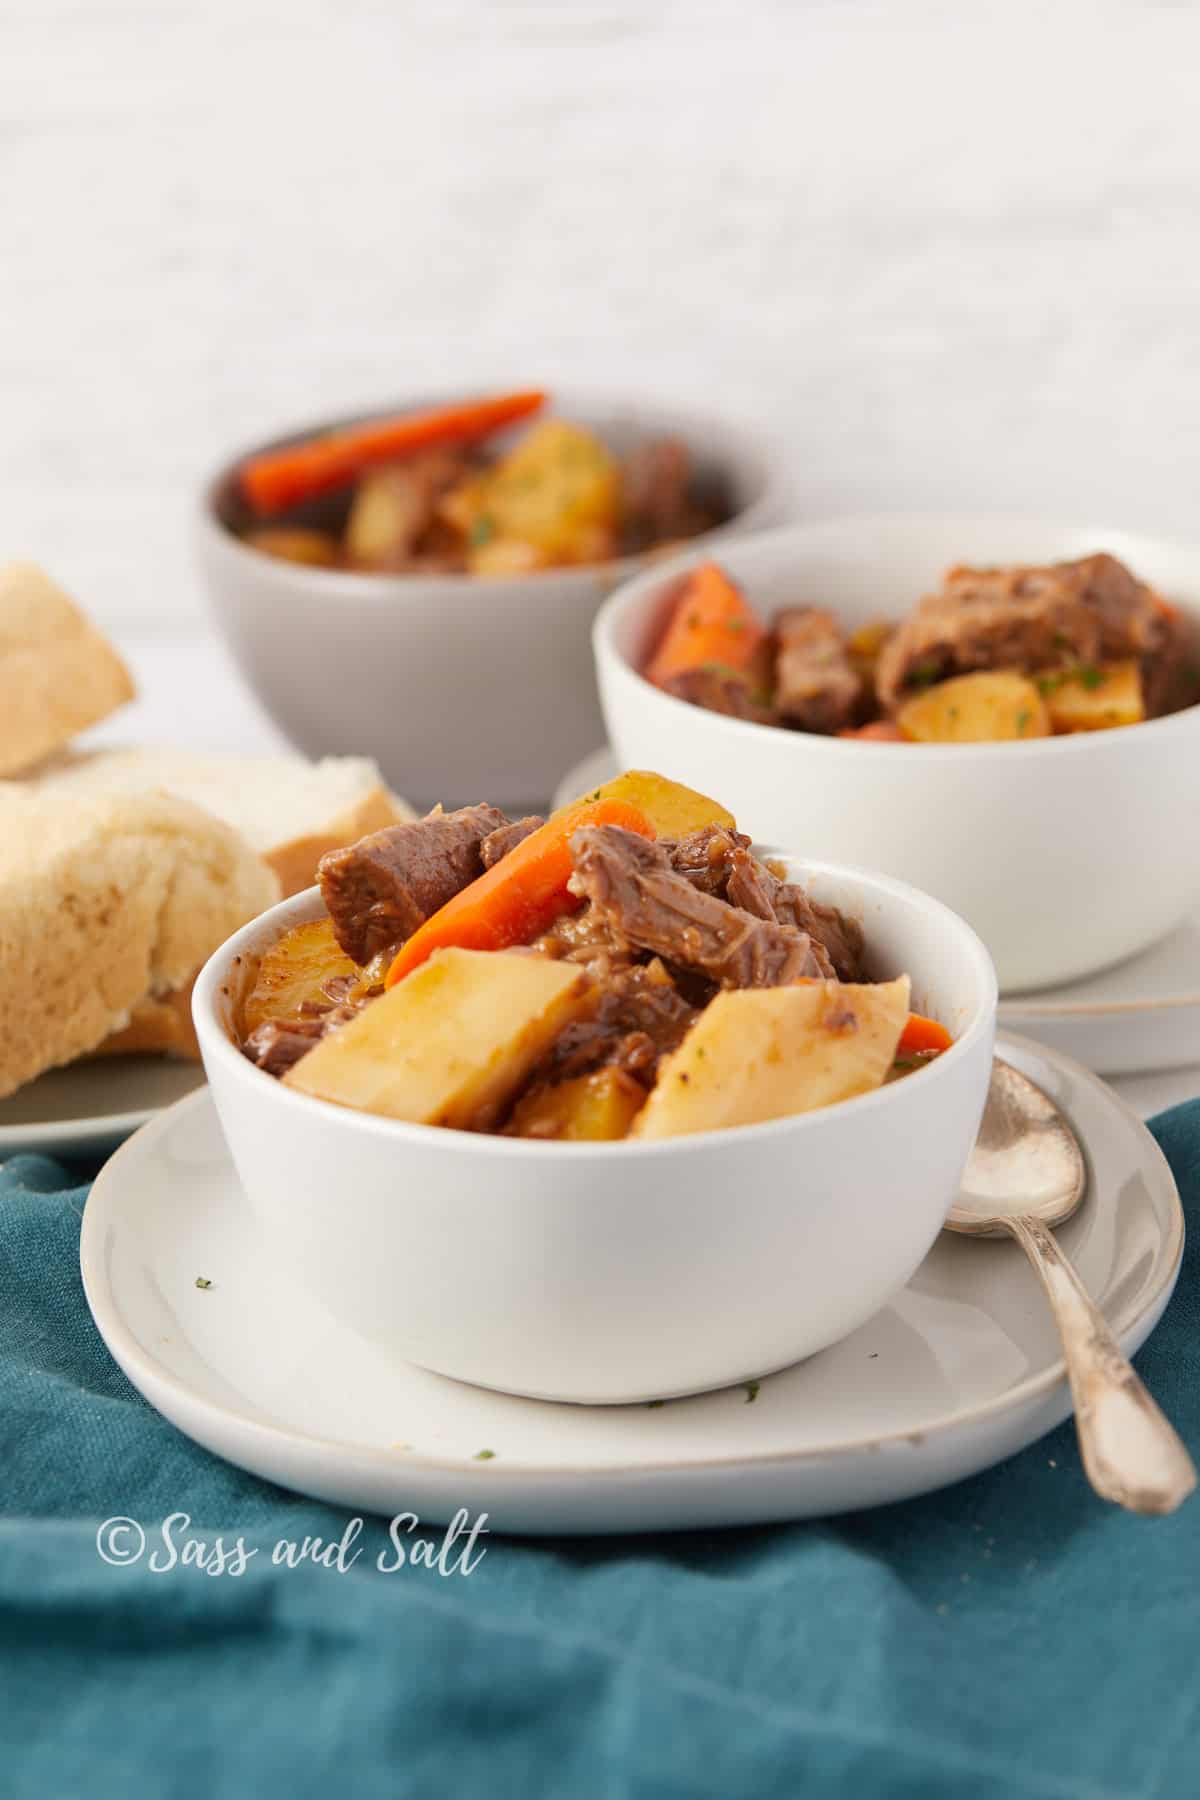 The image features a styled presentation of beef stew served in two white bowls. The stew is garnished with chopped herbs and is accompanied by pieces of rustic bread on a textured white table. The bowls are placed on a teal cloth, and a silver spoon rests beside one of the bowls, ready for eating. The stew looks hearty with chunks of beef, carrots, and potatoes, and is captured in a well-lit setting that accentuates its colors and textures. The watermark "Sass and Salt" indicates the branding behind the image.